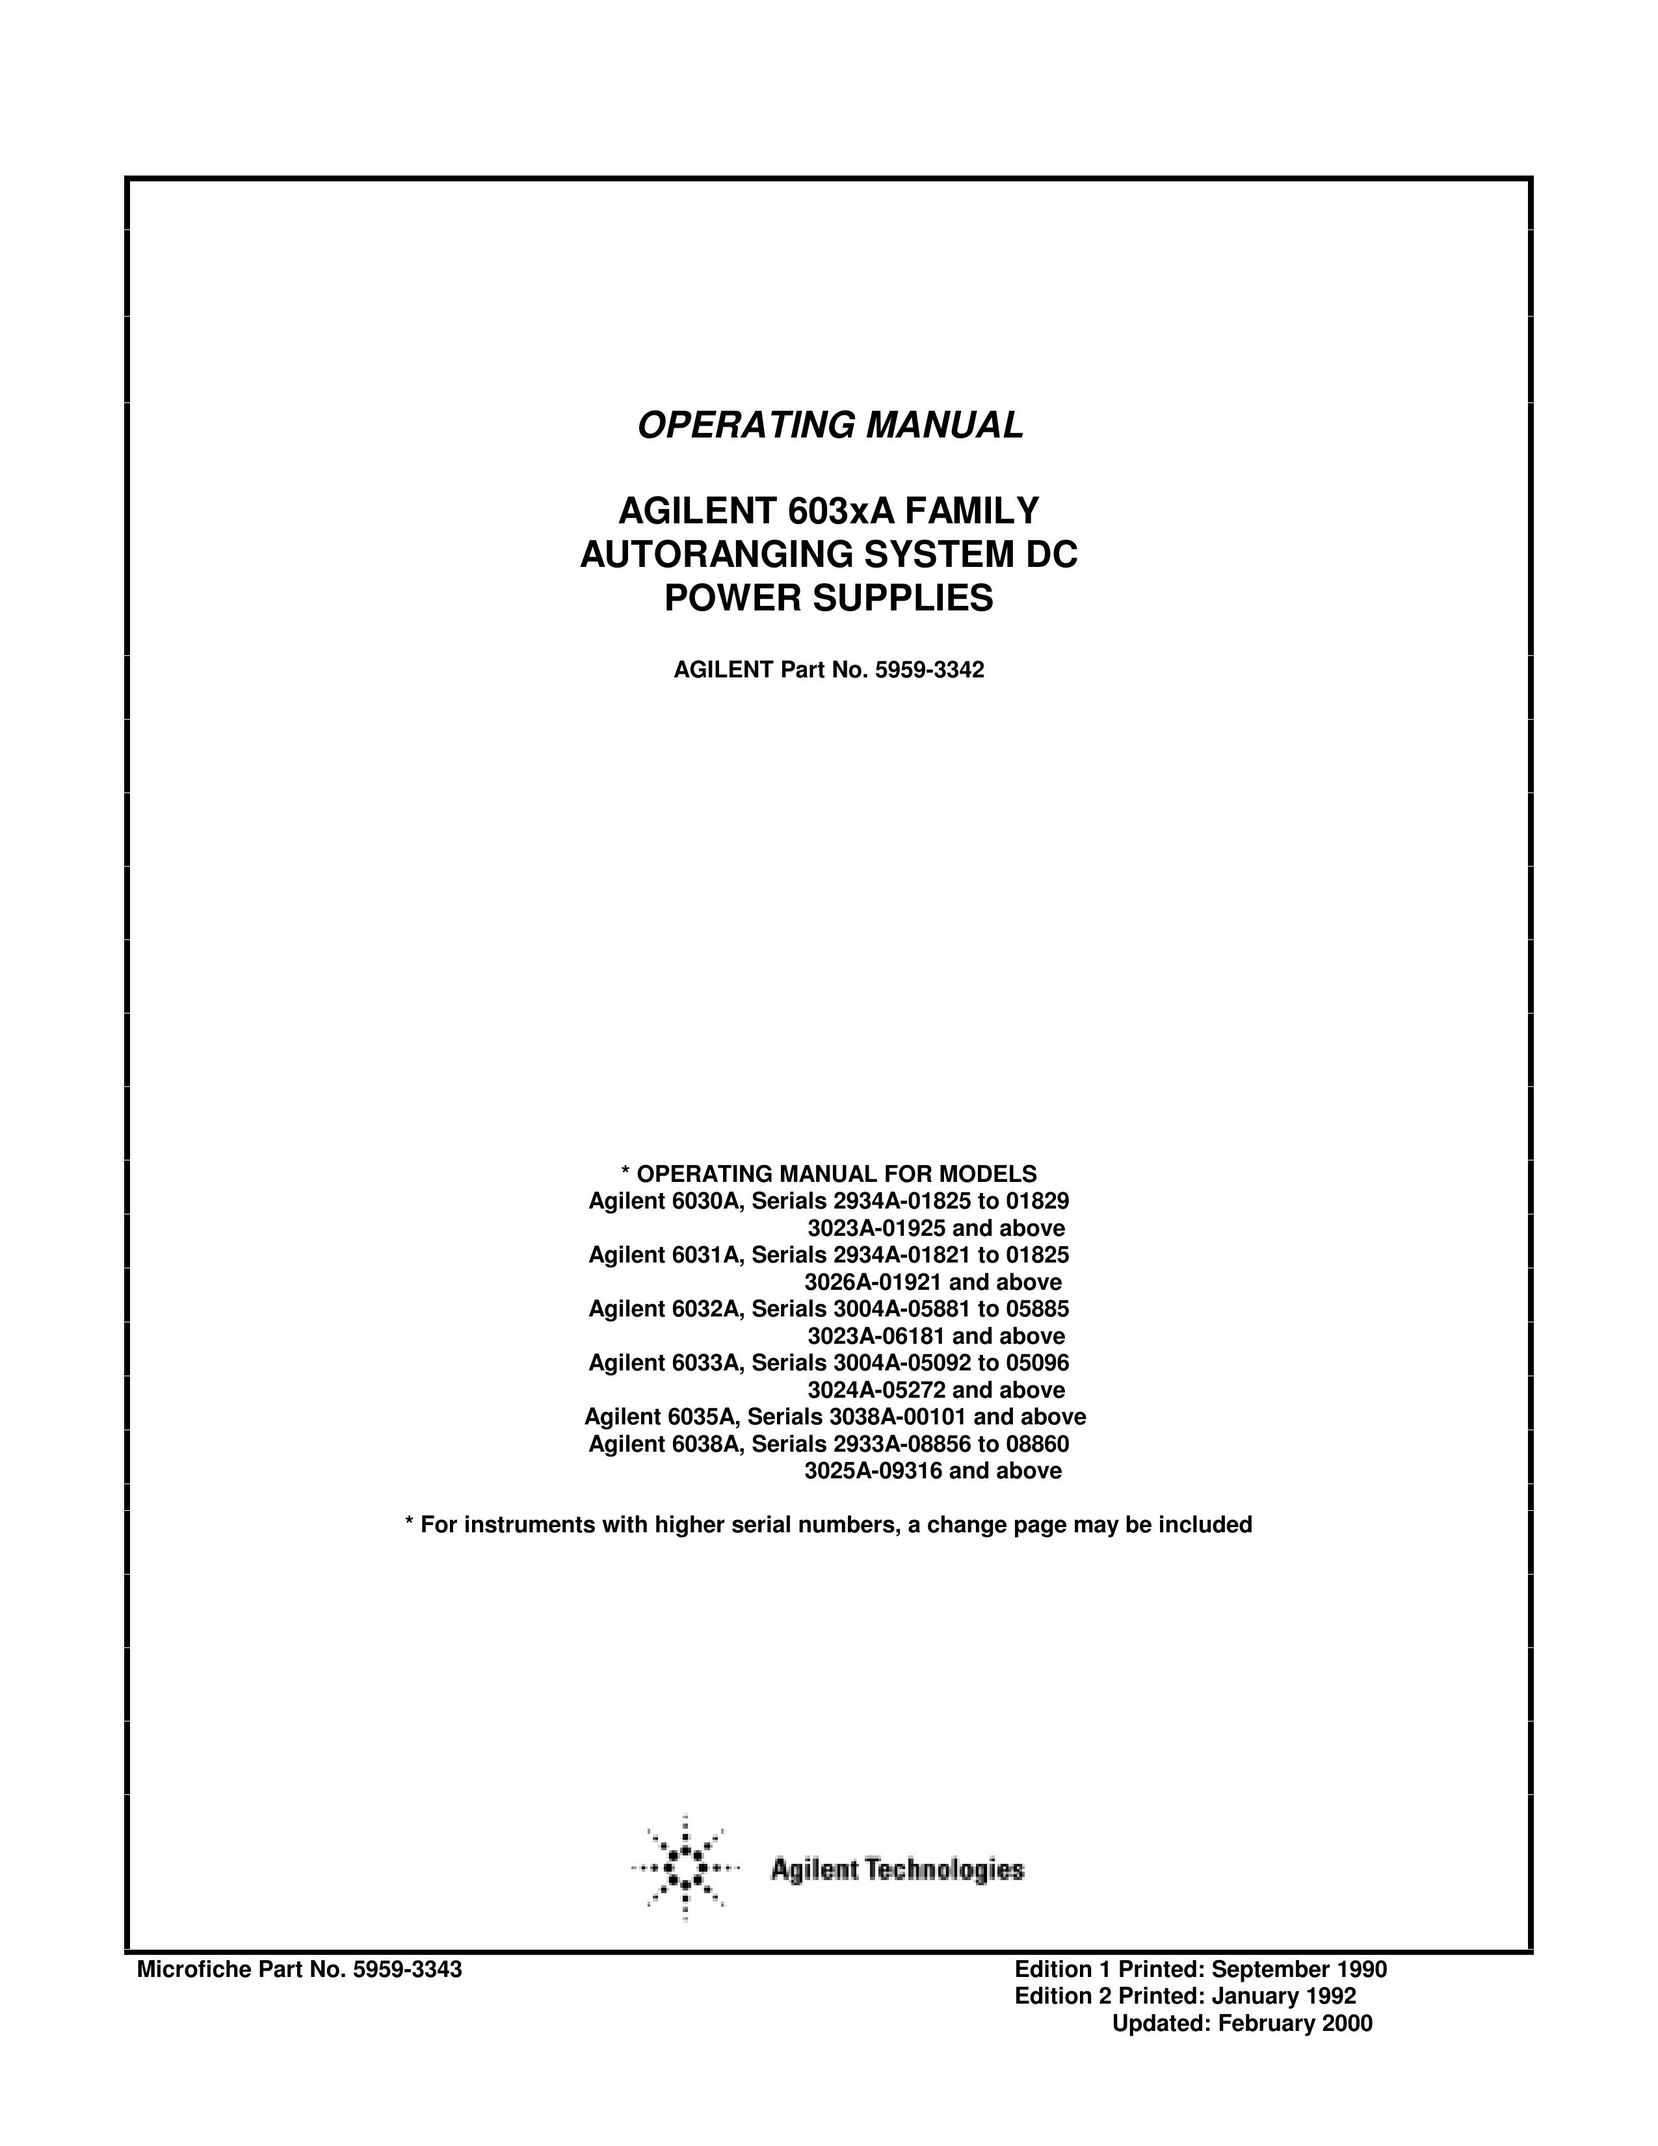 Agilent Technologies Serials 2934A-01825 to 01829 3023A-01925 Video Gaming Accessories User Manual (Page 1)